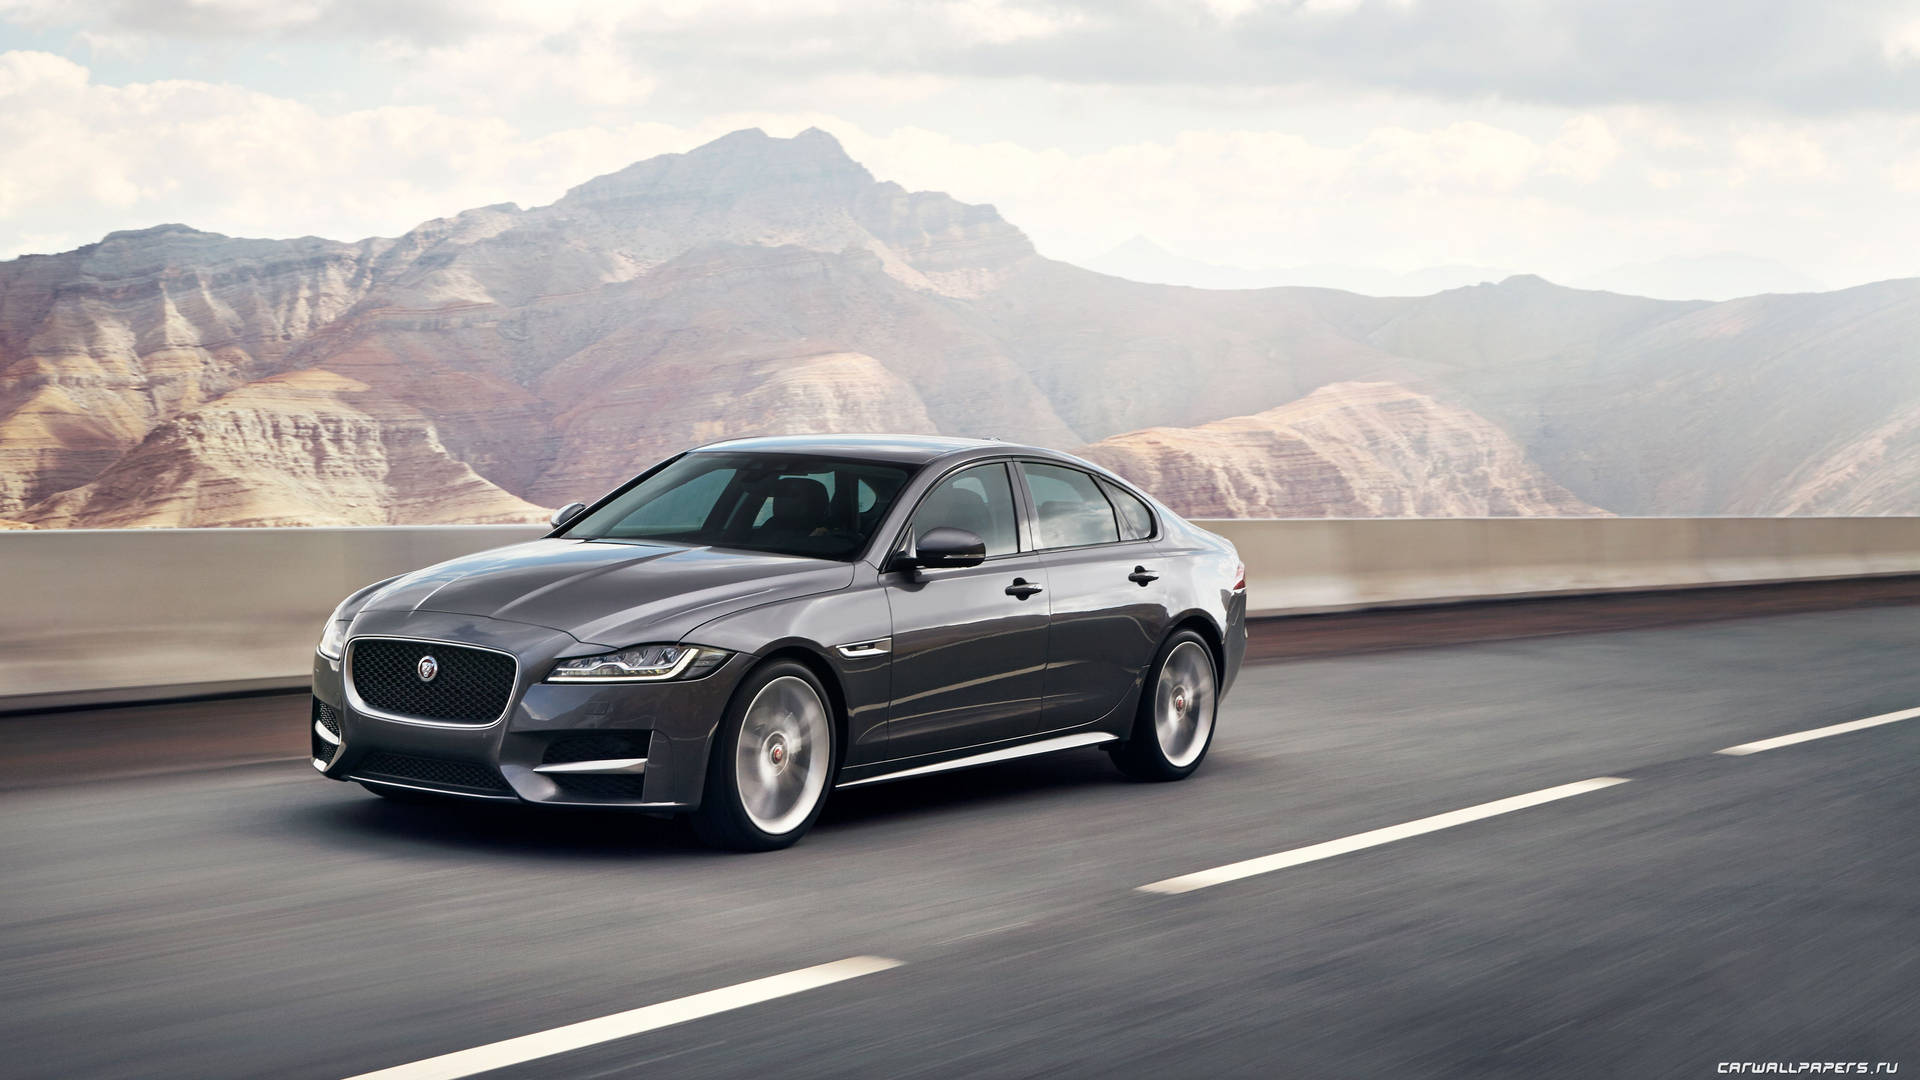 Cruising The Road In Style In A Grey Jaguar Background